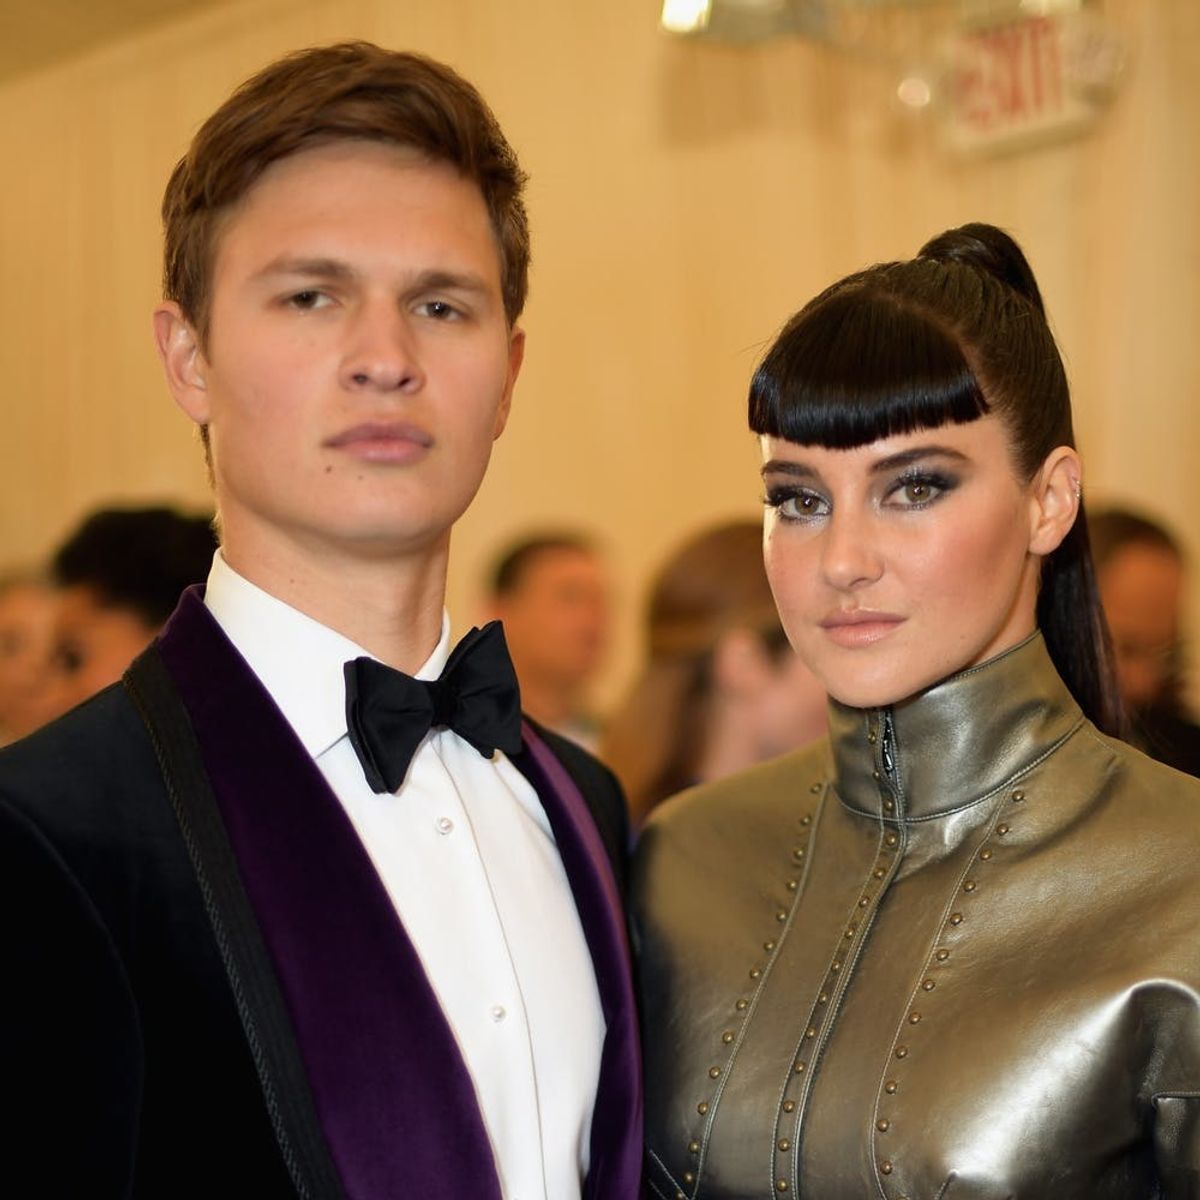 See Shailene Woodley and Ansel Elgort’s ‘Fault in Our Stars’ Reunion at the Met Gala